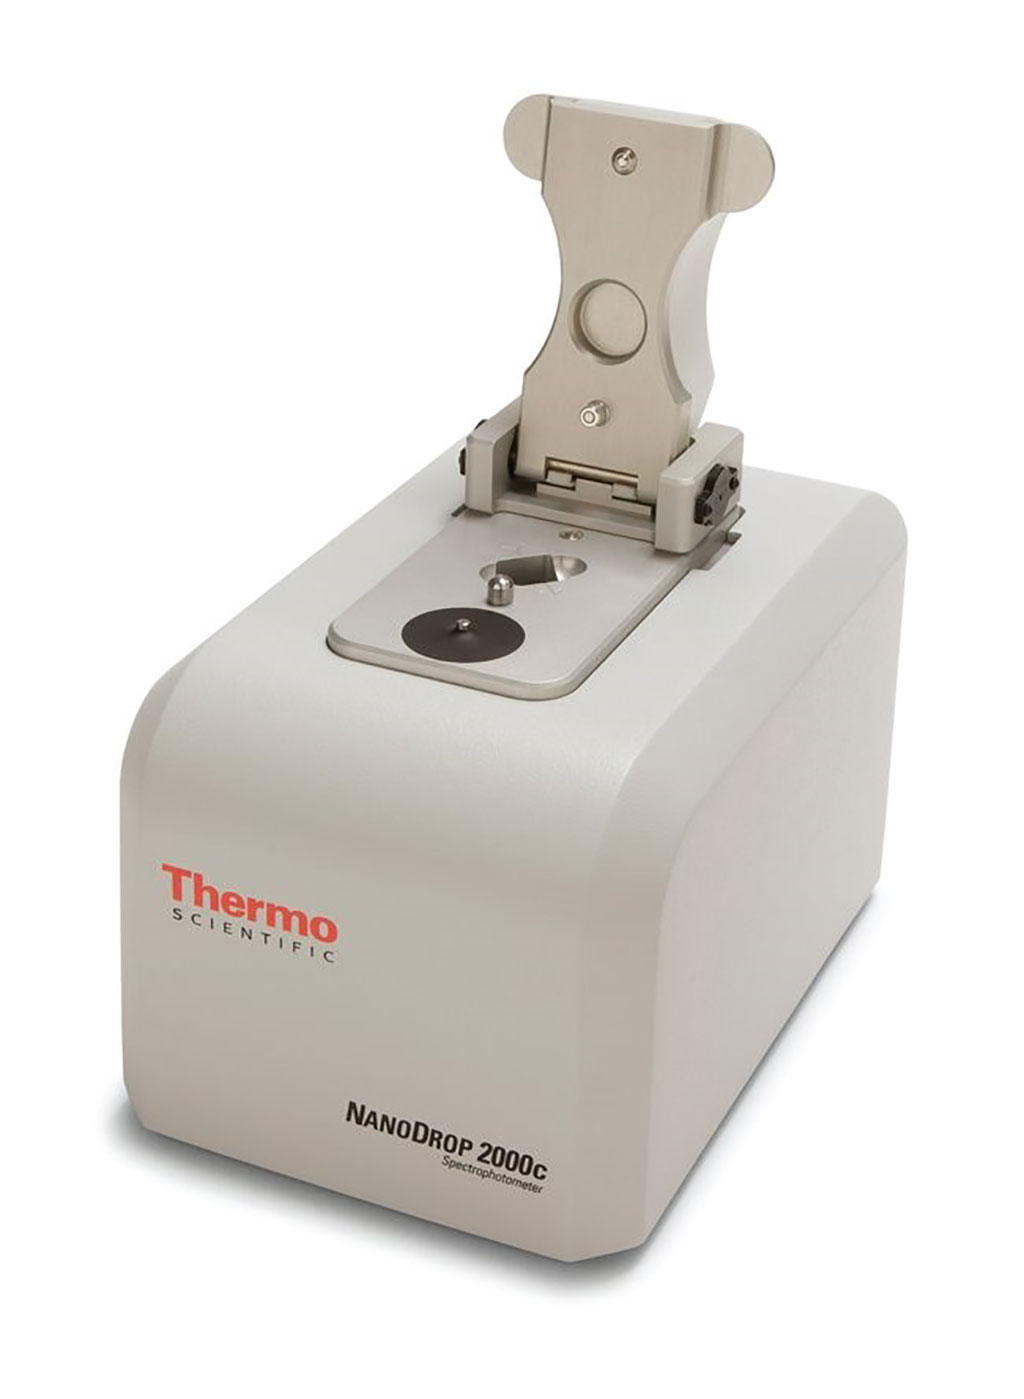 Image: The NanoDrop 2000 and 2000c are full-spectrum, UV-Vis spectrophotometers used to quantify and assess purity of DNA, RNA, Protein and more (Photo courtesy of Thermo Fisher Scientific).